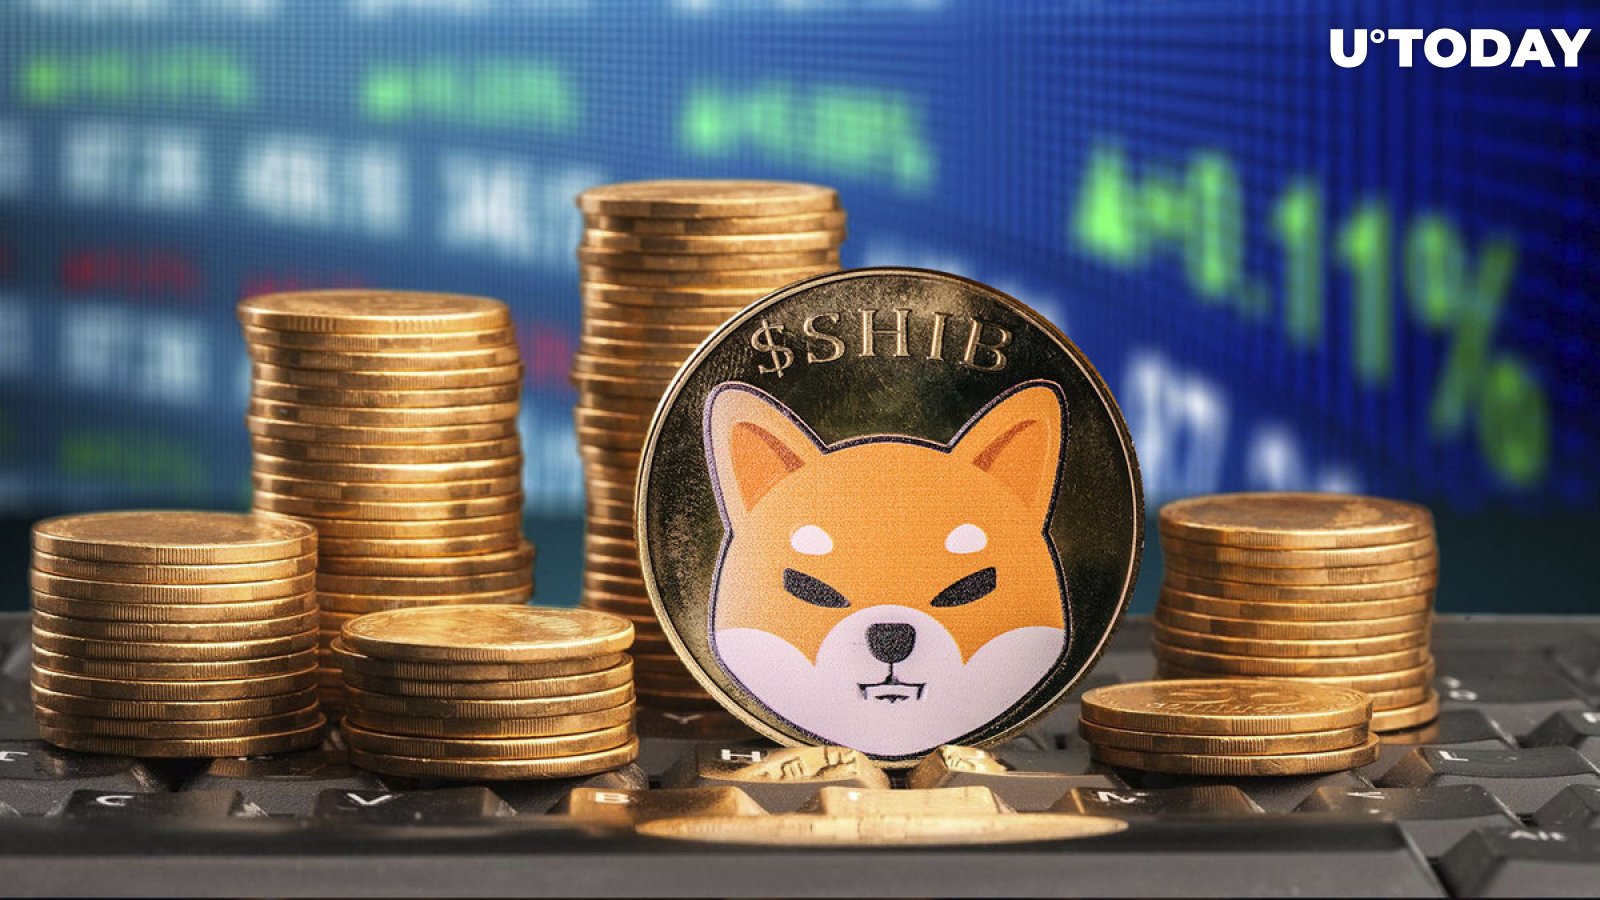 Shiba Inu (SHIB) Suddenly Gains 7% in Hour, Here's What's Happening